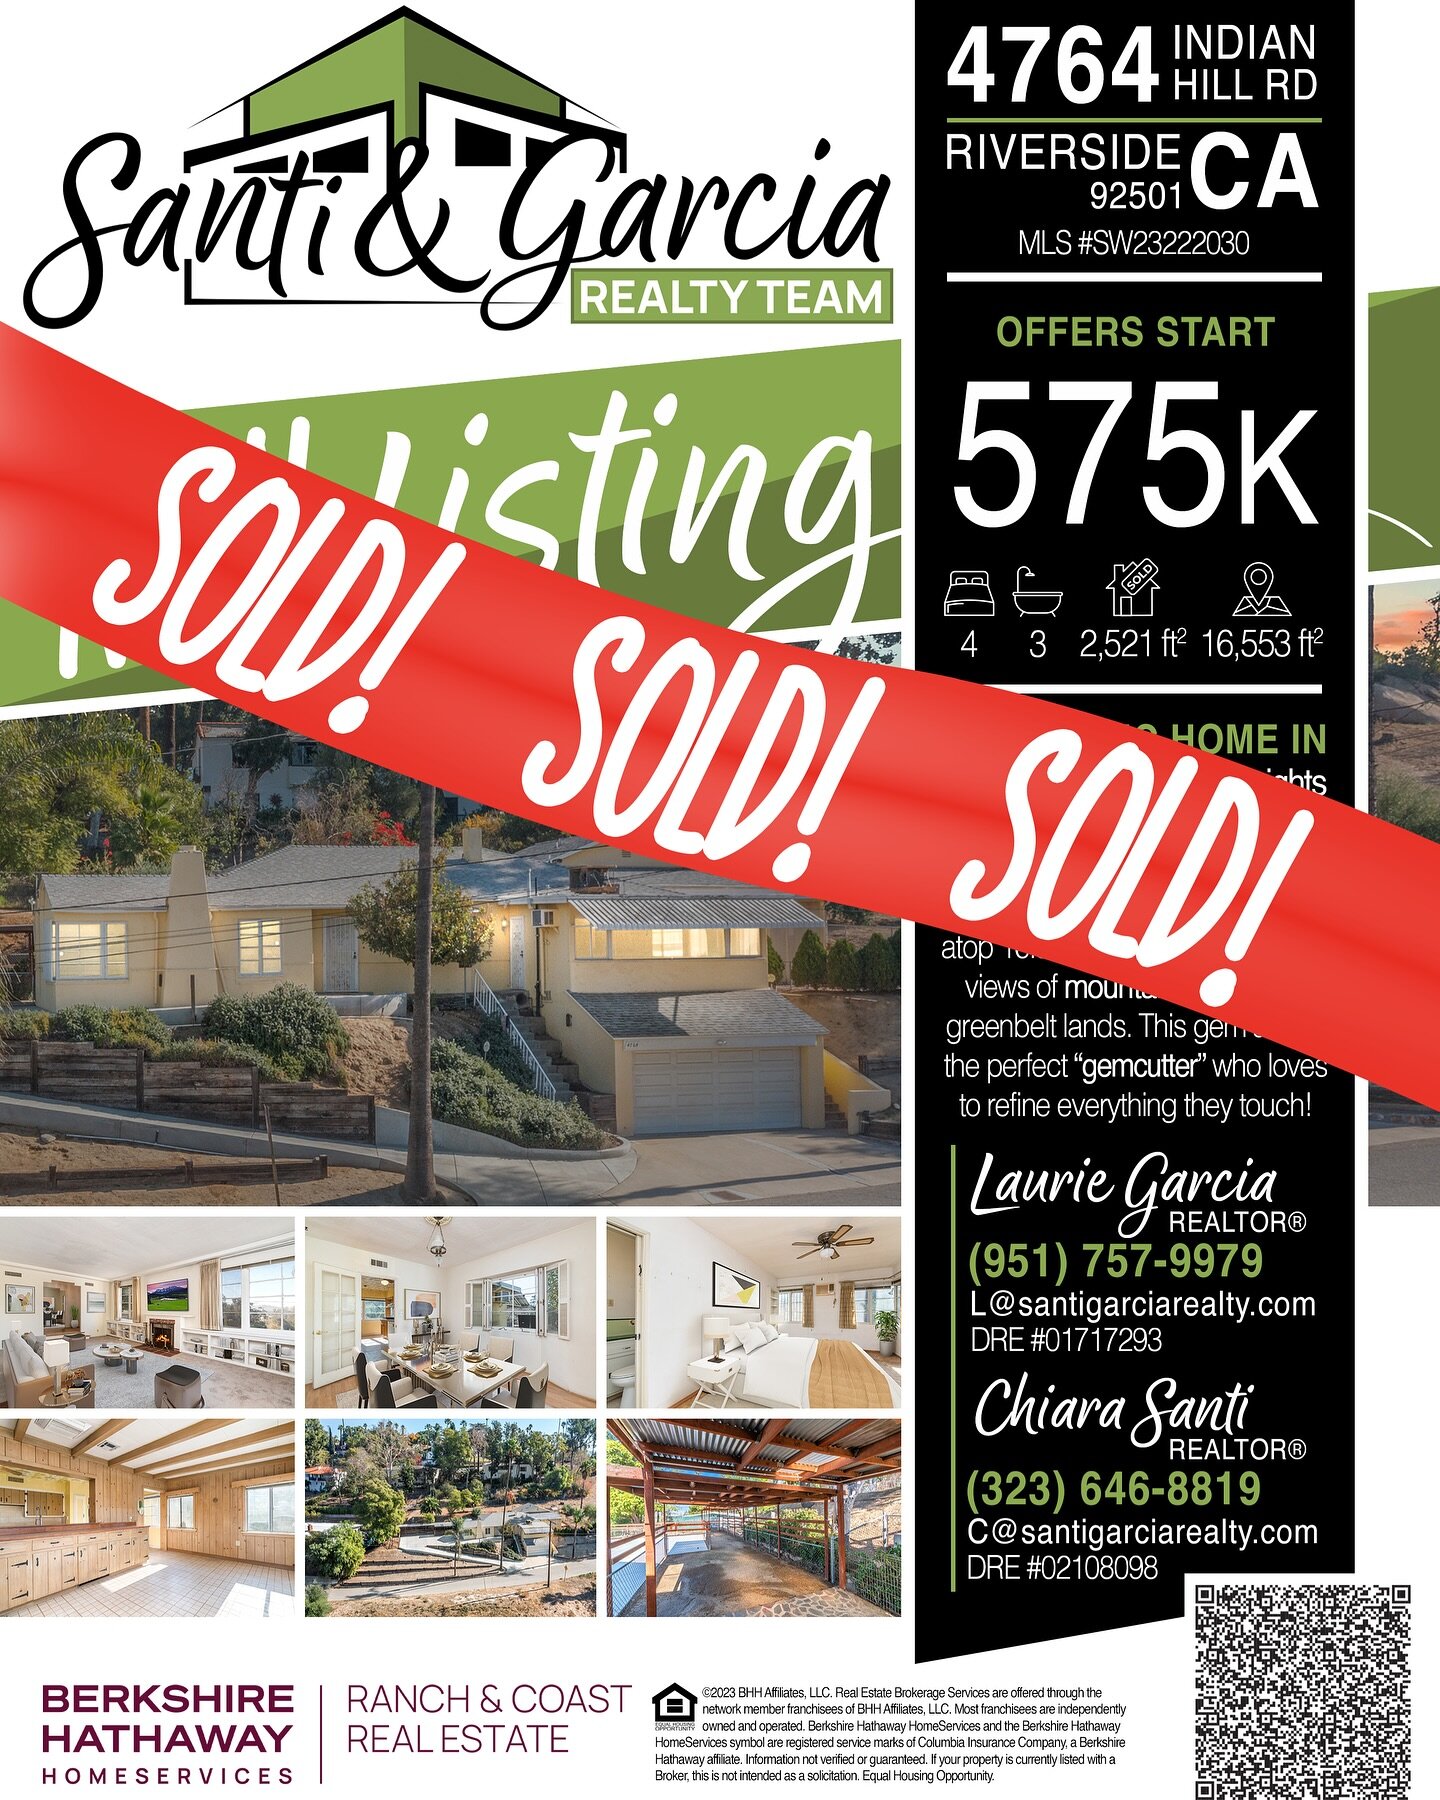 🔑🏠JUST SOLD‼️

📍4764 Indian Hill Rd, Riverside, CA 92501

👉More info at santigarciarealty.com

#SantiGarciaRealty #realestate #realtor #realty #carealestategroup #commercialrealestate #residentialrealestate